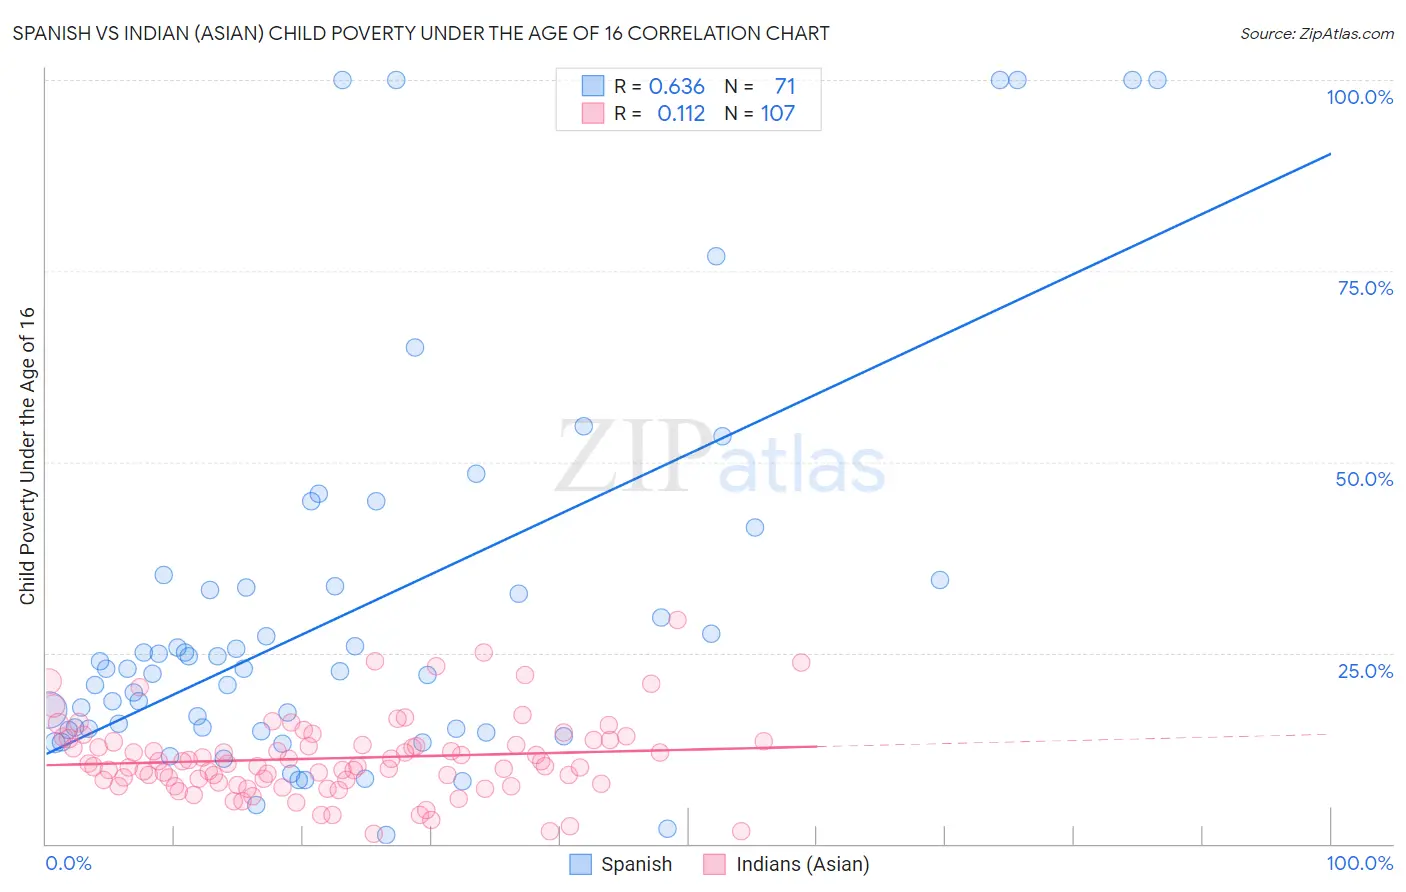 Spanish vs Indian (Asian) Child Poverty Under the Age of 16